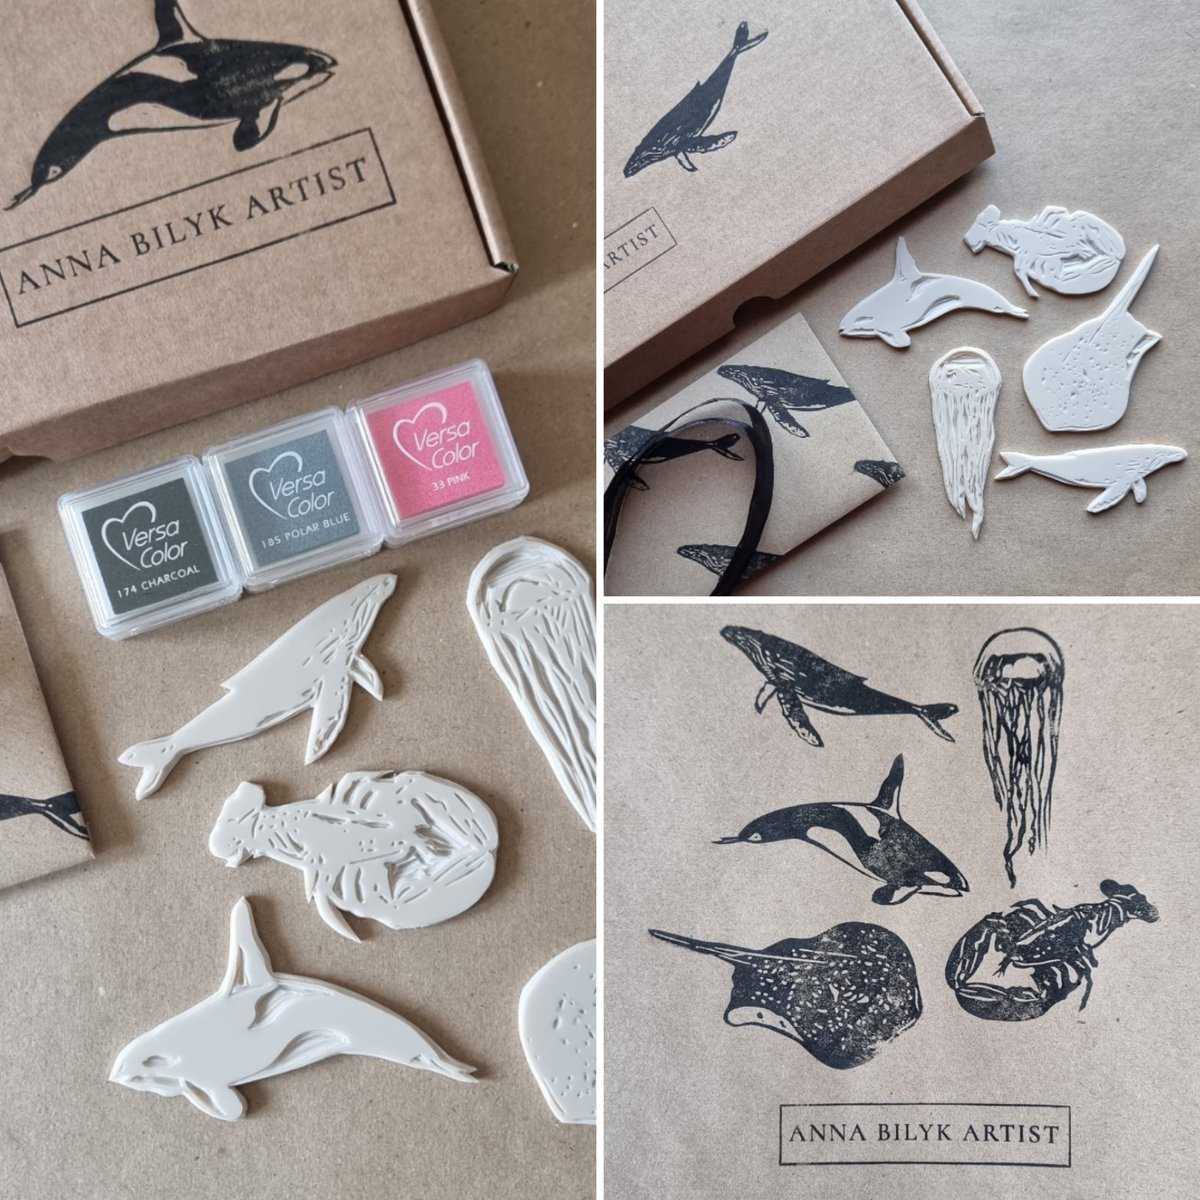 The Sealife Stamp Kit contains 5 hand carved stamps & 3 mini ink pads - these kits are great for journaling, scrapbooking, packaging design or just some craft fun 🐋
thebritishcrafthouse.co.uk/product/sealif…
@BritishCrafting #shopindie #earlybiz #UKGiftHour #UKGiftAM #Stamps #crafting #crafts